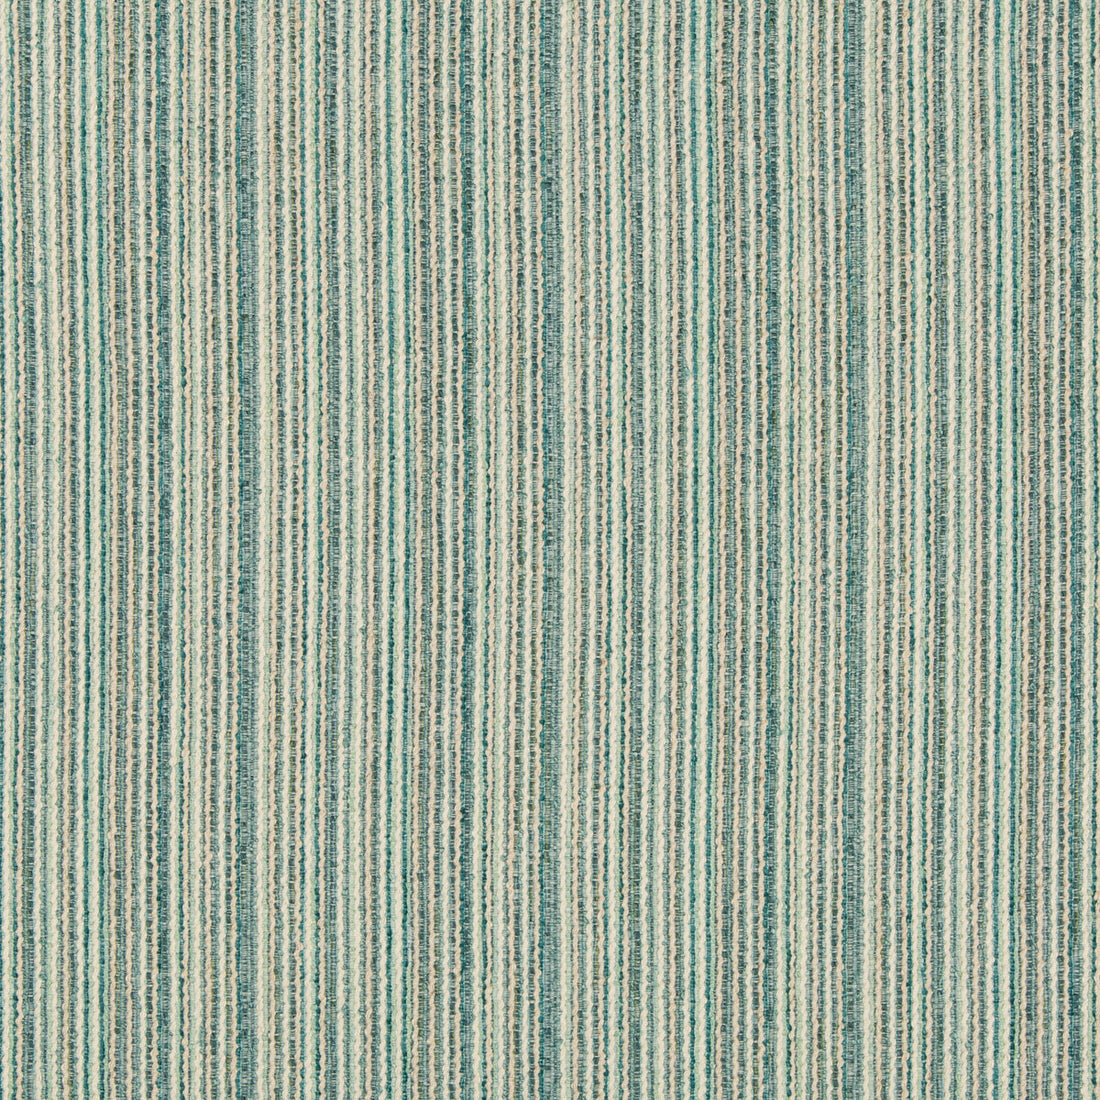 Kravet Design fabric in 34989-1613 color - pattern 34989.1613.0 - by Kravet Design in the Performance Crypton Home collection